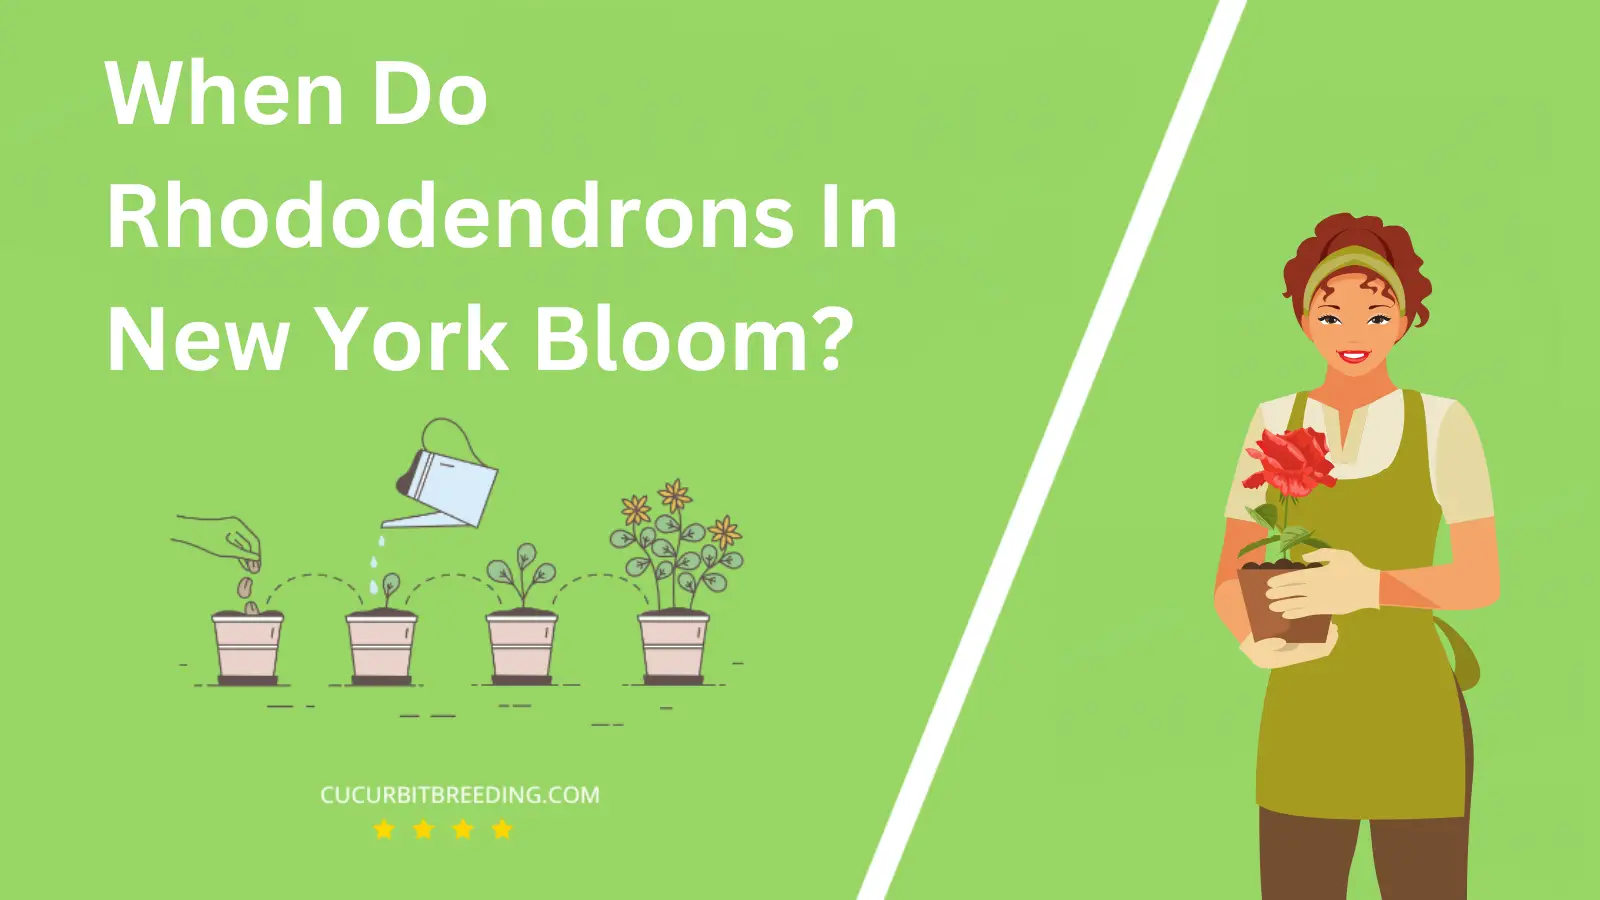 When Do Rhododendrons In New York Bloom?